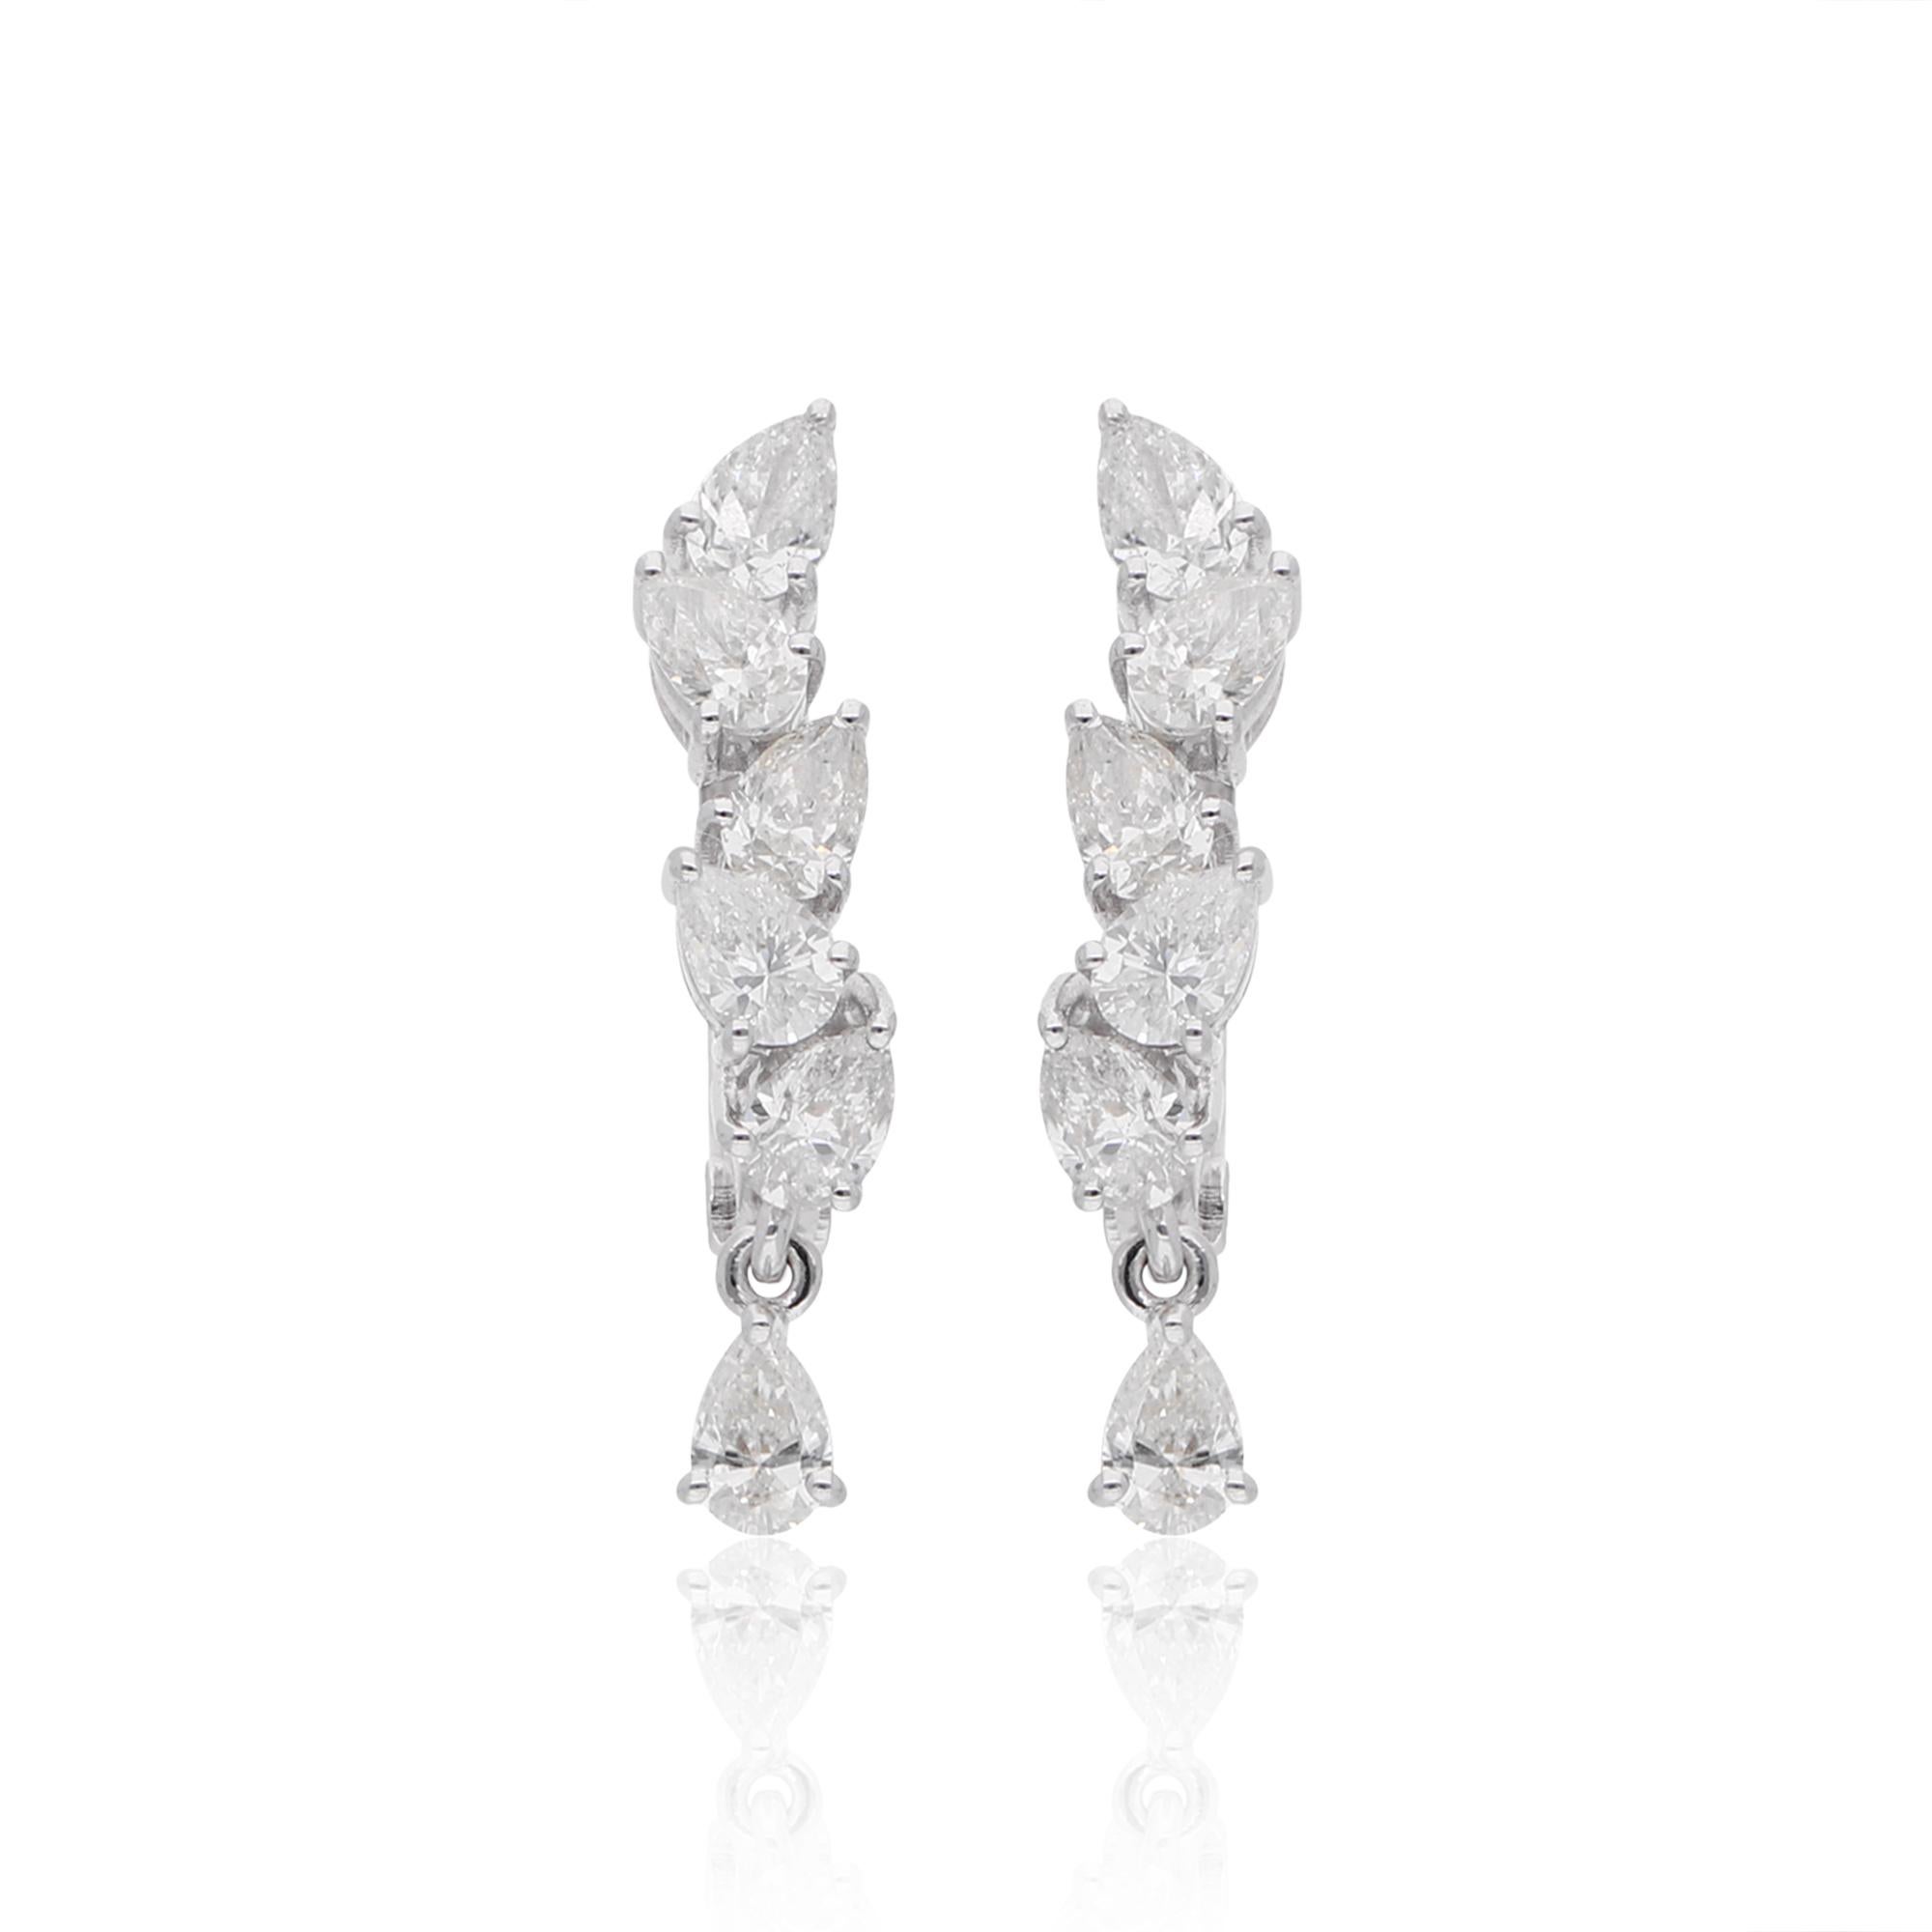 Item Code :- SEE-13272
Gross Wt. :- 3.10 gm
18k Solid White Gold Wt. :- 2.90 gm
Natural Diamond Wt. :- 1.00 Ct. ( AVERAGE DIAMOND CLARITY SI1-SI2 & COLOR H-I )
Earrings Size :- 18 mm approx.

✦ Sizing
.....................
We can adjust most items